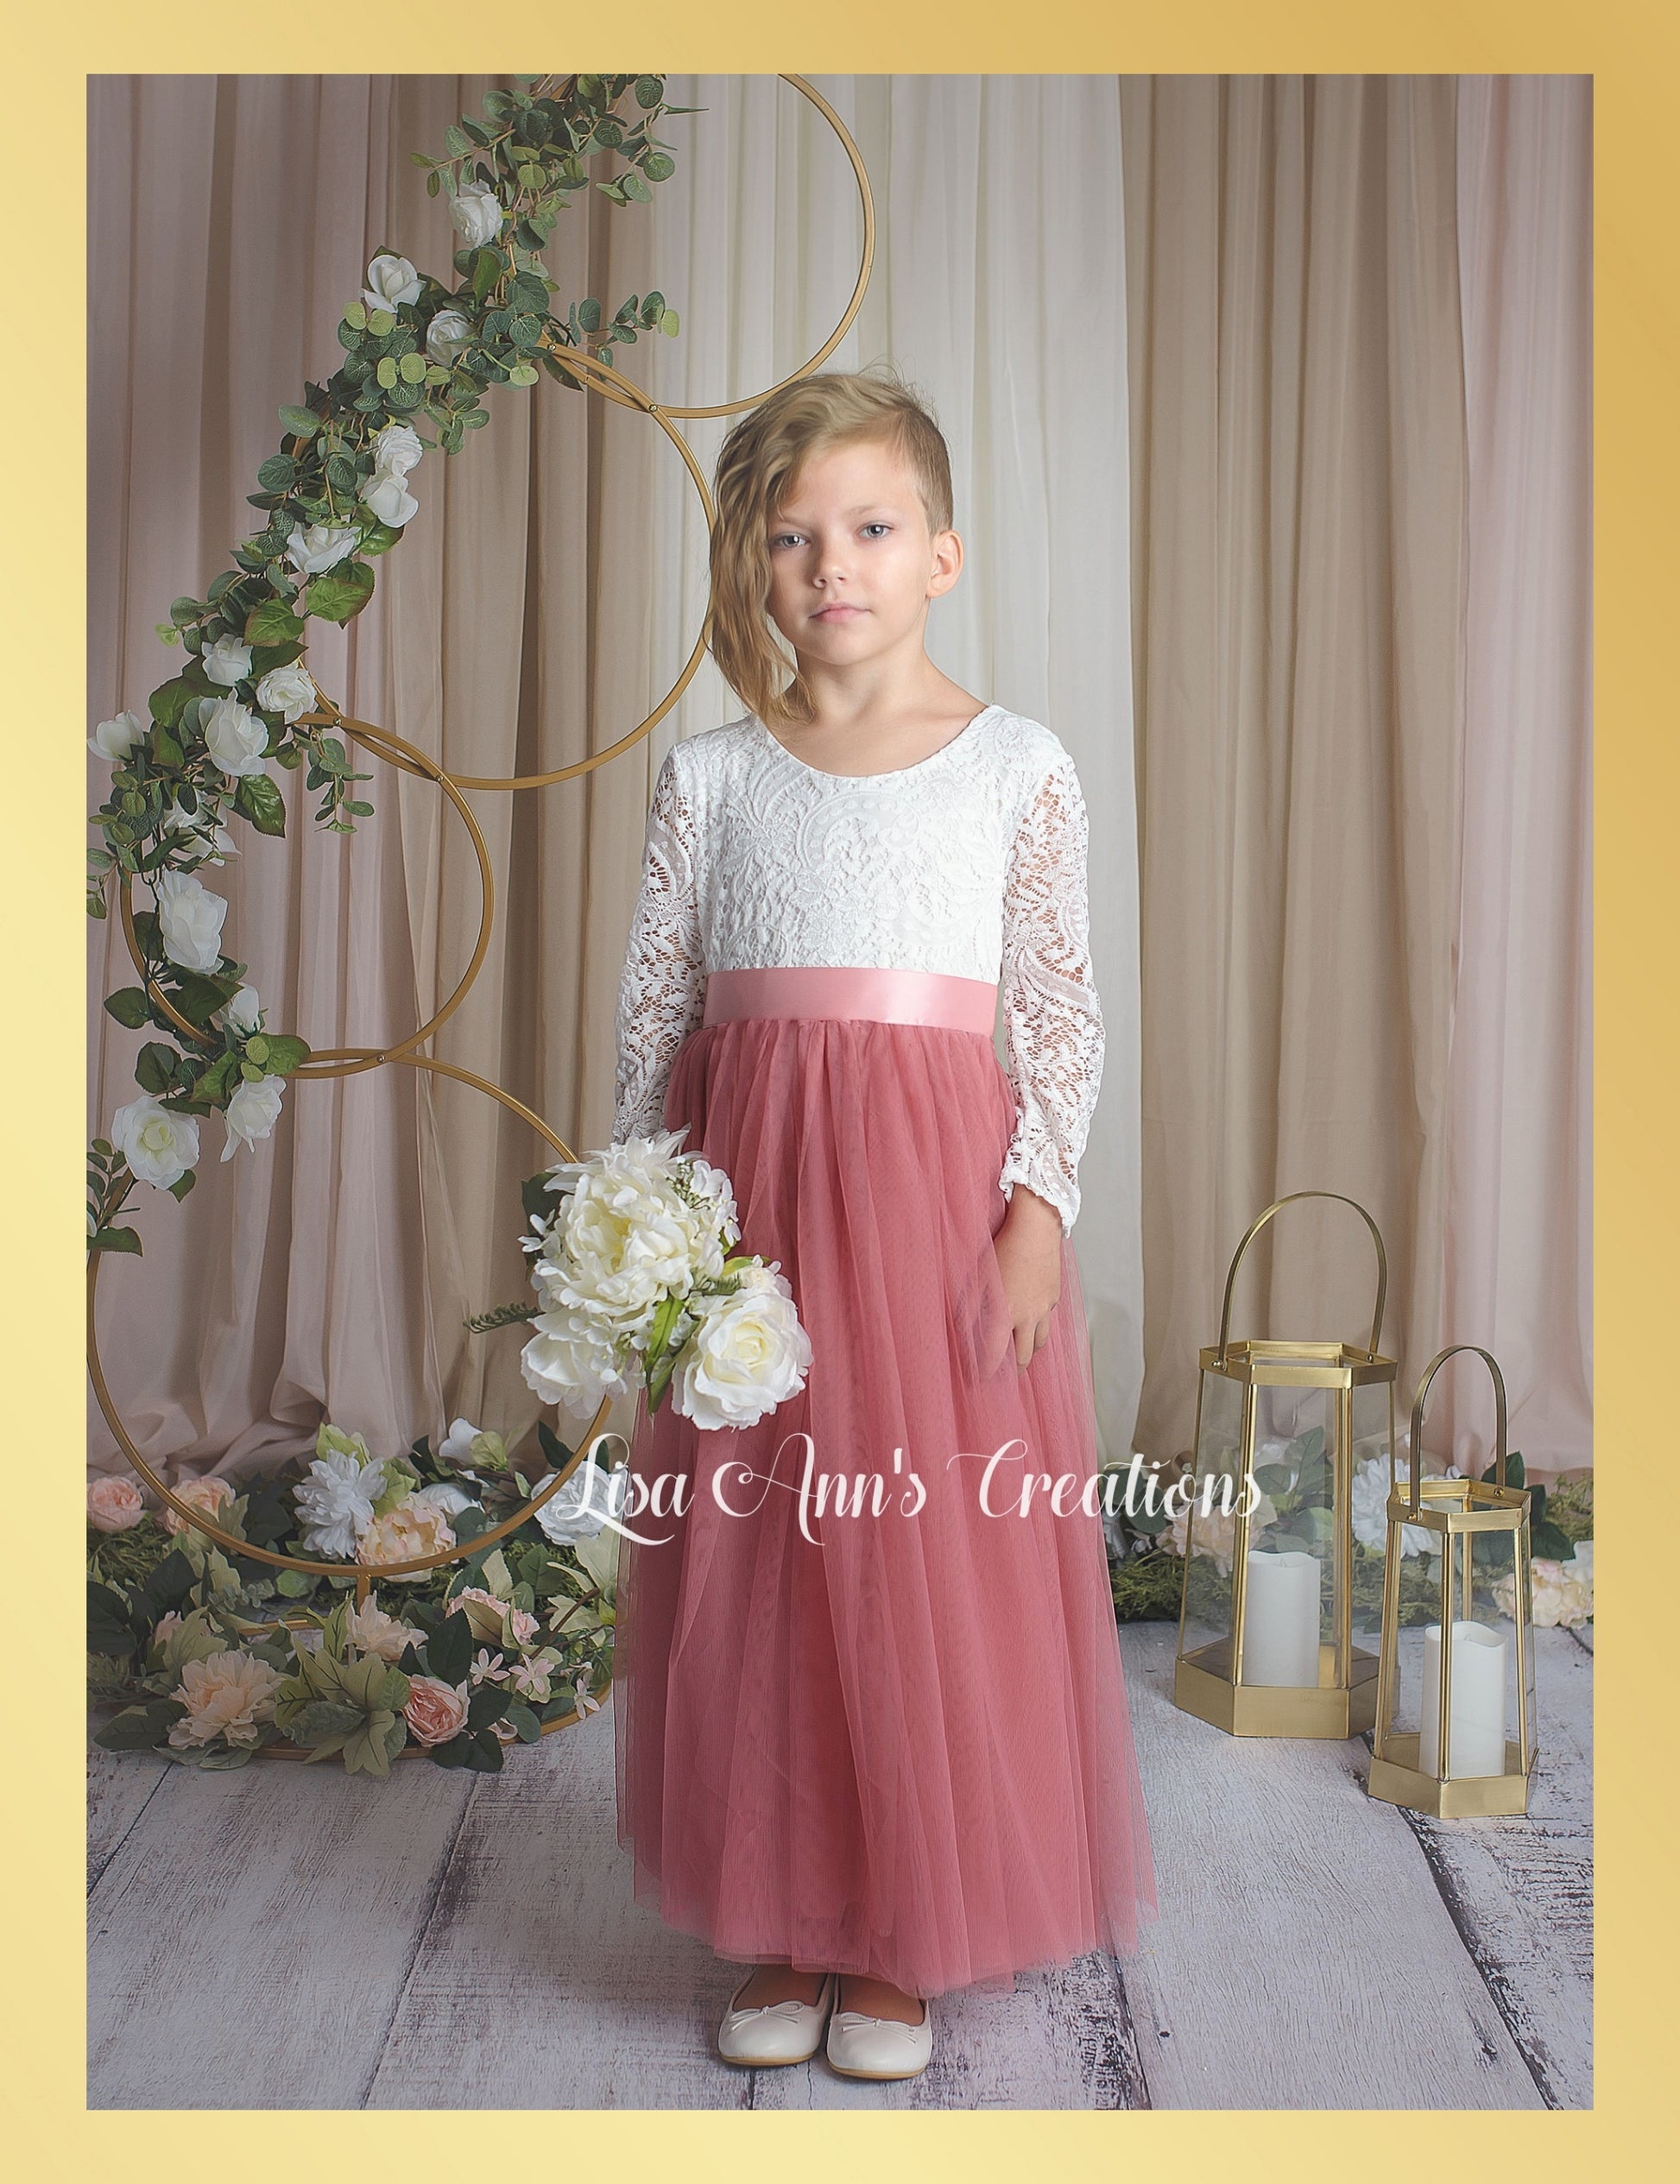 Dusty Rose Flower Girl Dress with white lace